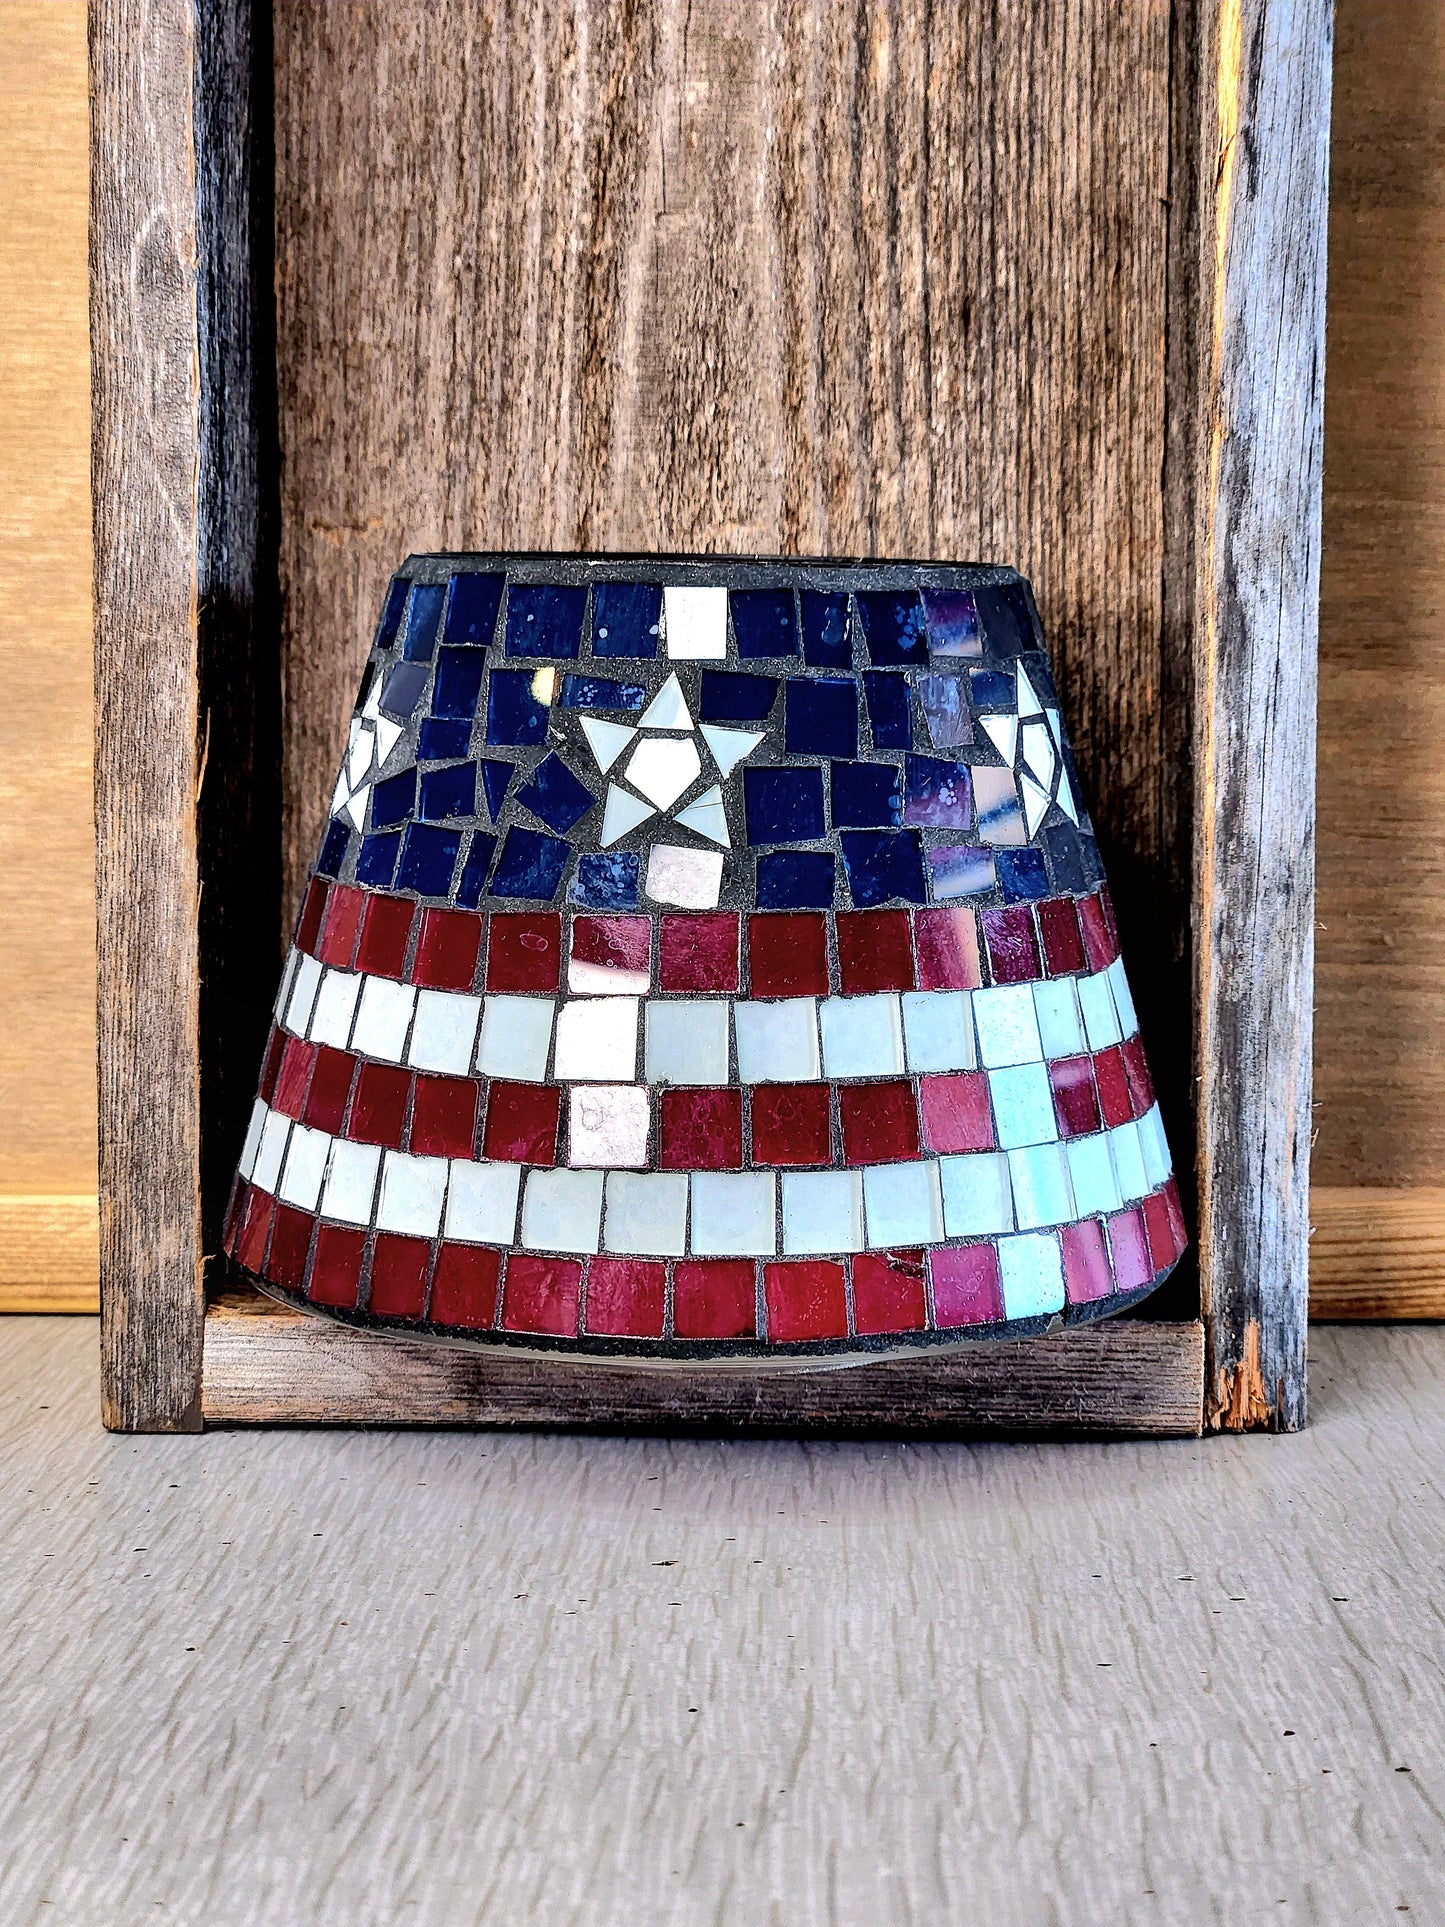 Candle Shade - 4TH of July Edition